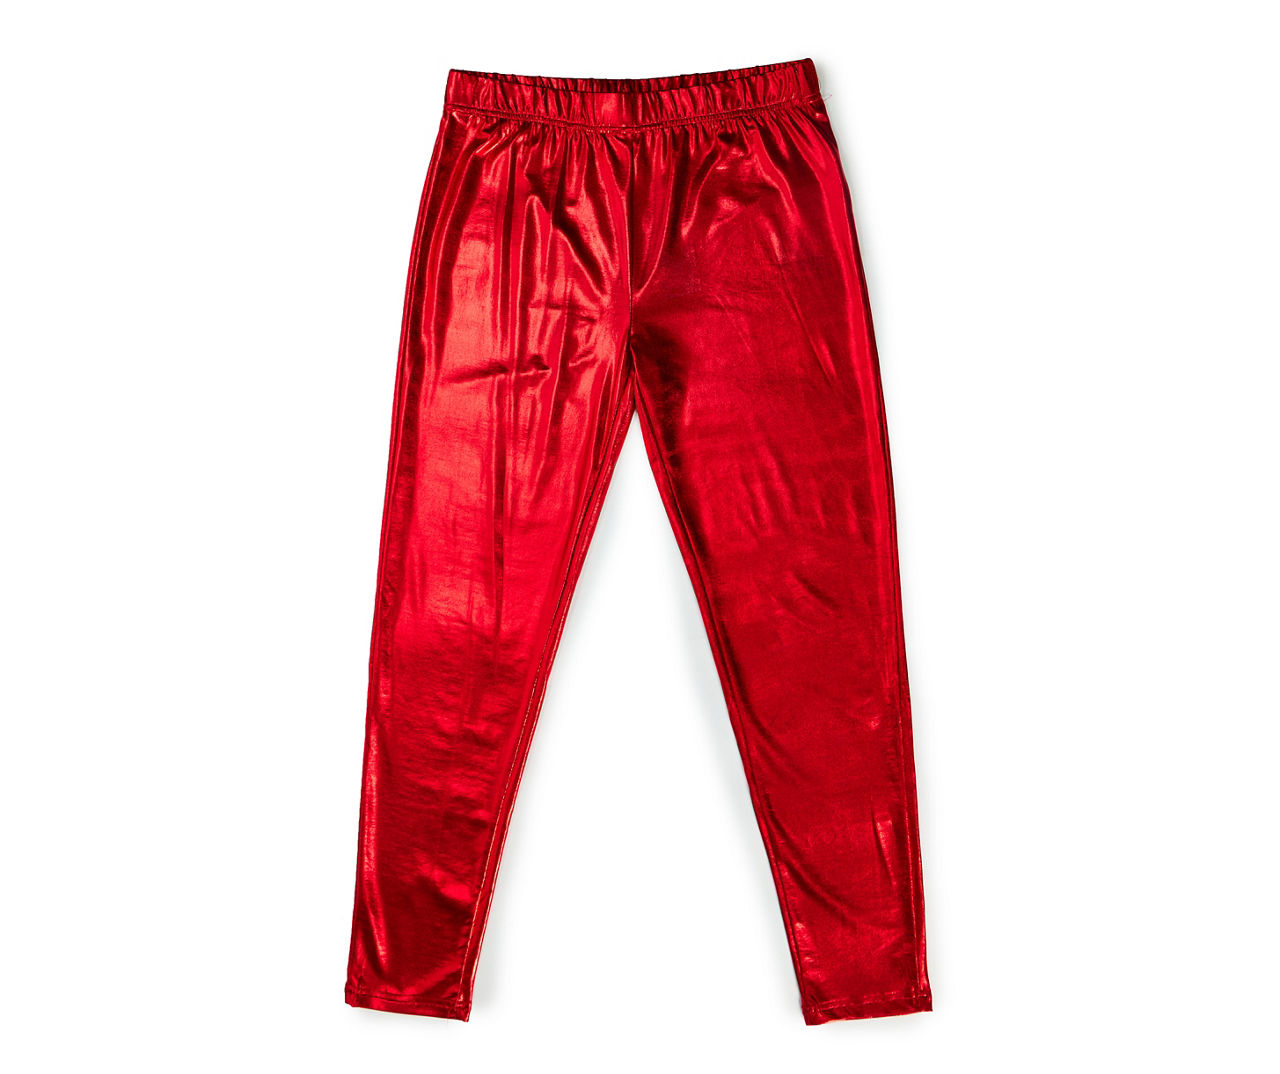 Cool Wholesale shiny red leggings In Any Size And Style 